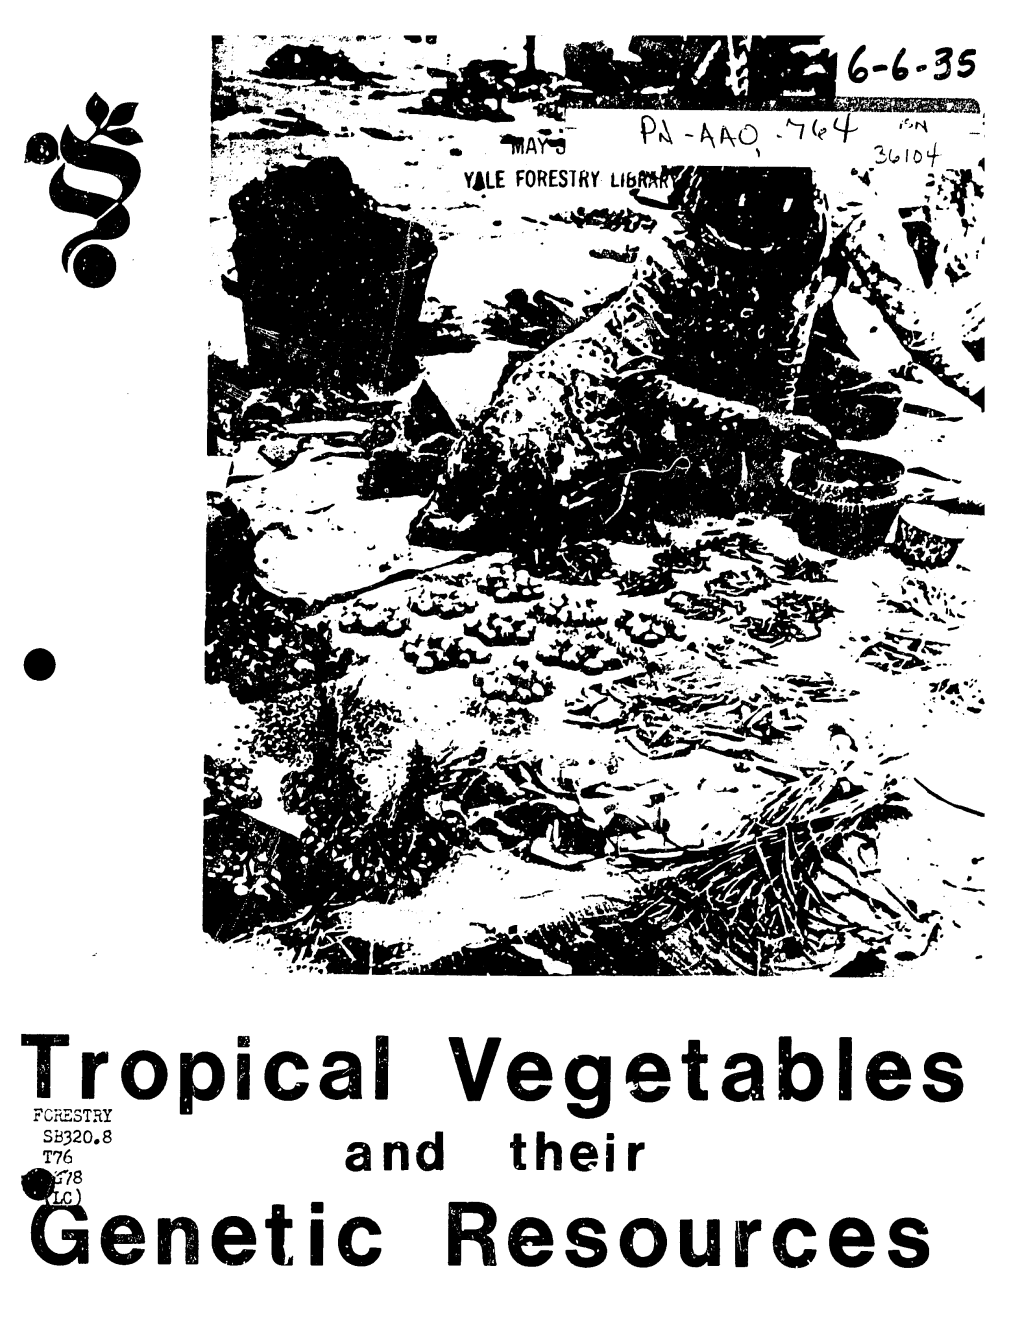 Tropical Vegetables Netic Resources